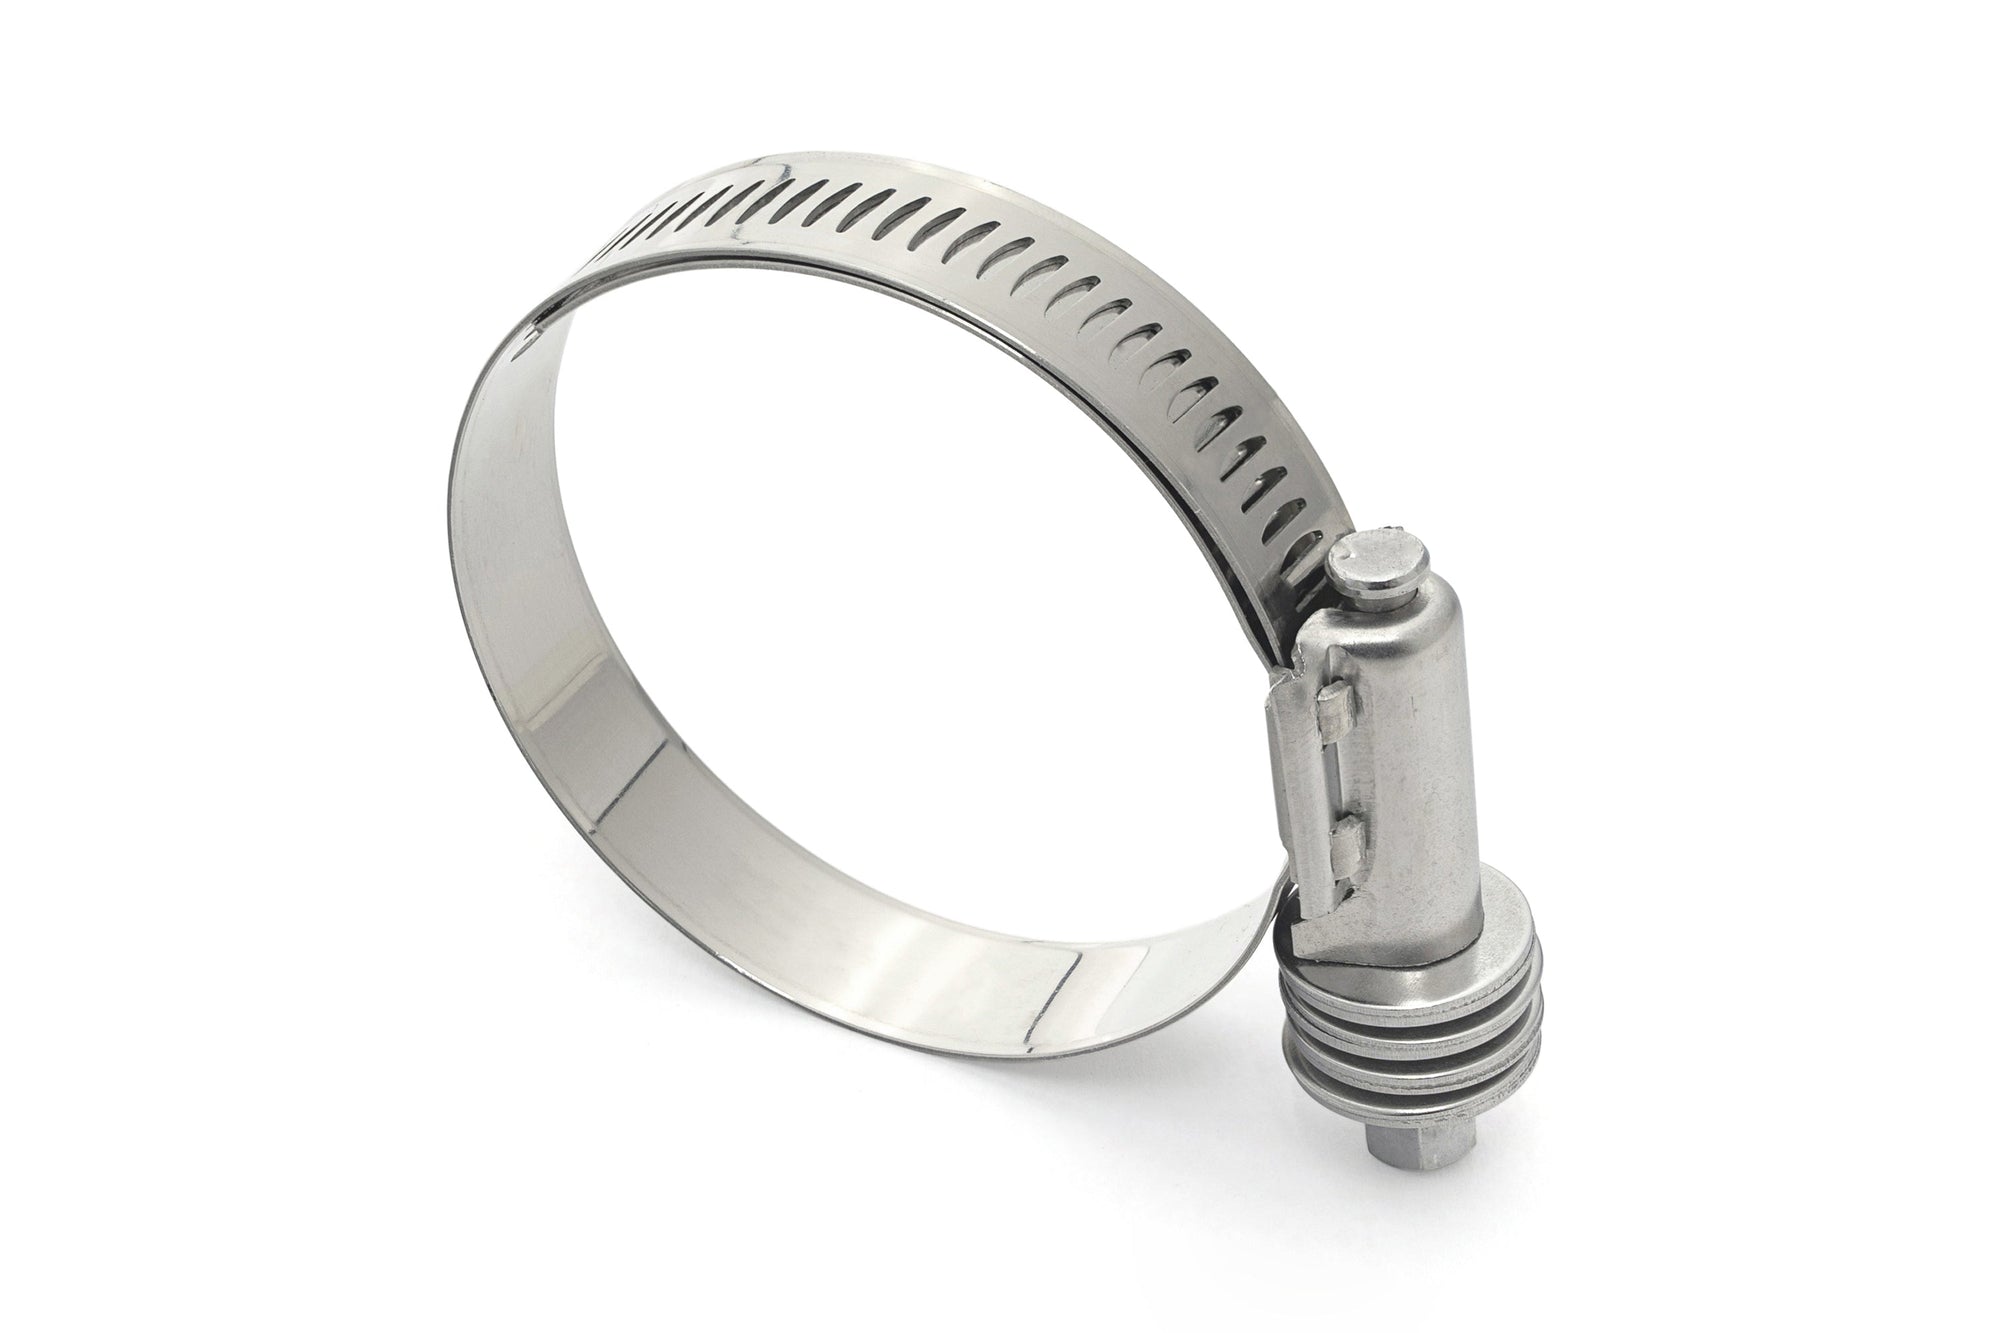 HPS Stainless Steel Heavy Duty Constant Torque Hose Clamp Size # 512 CTHD-512 4.25 - 5.12 inch 108mm - 130mm